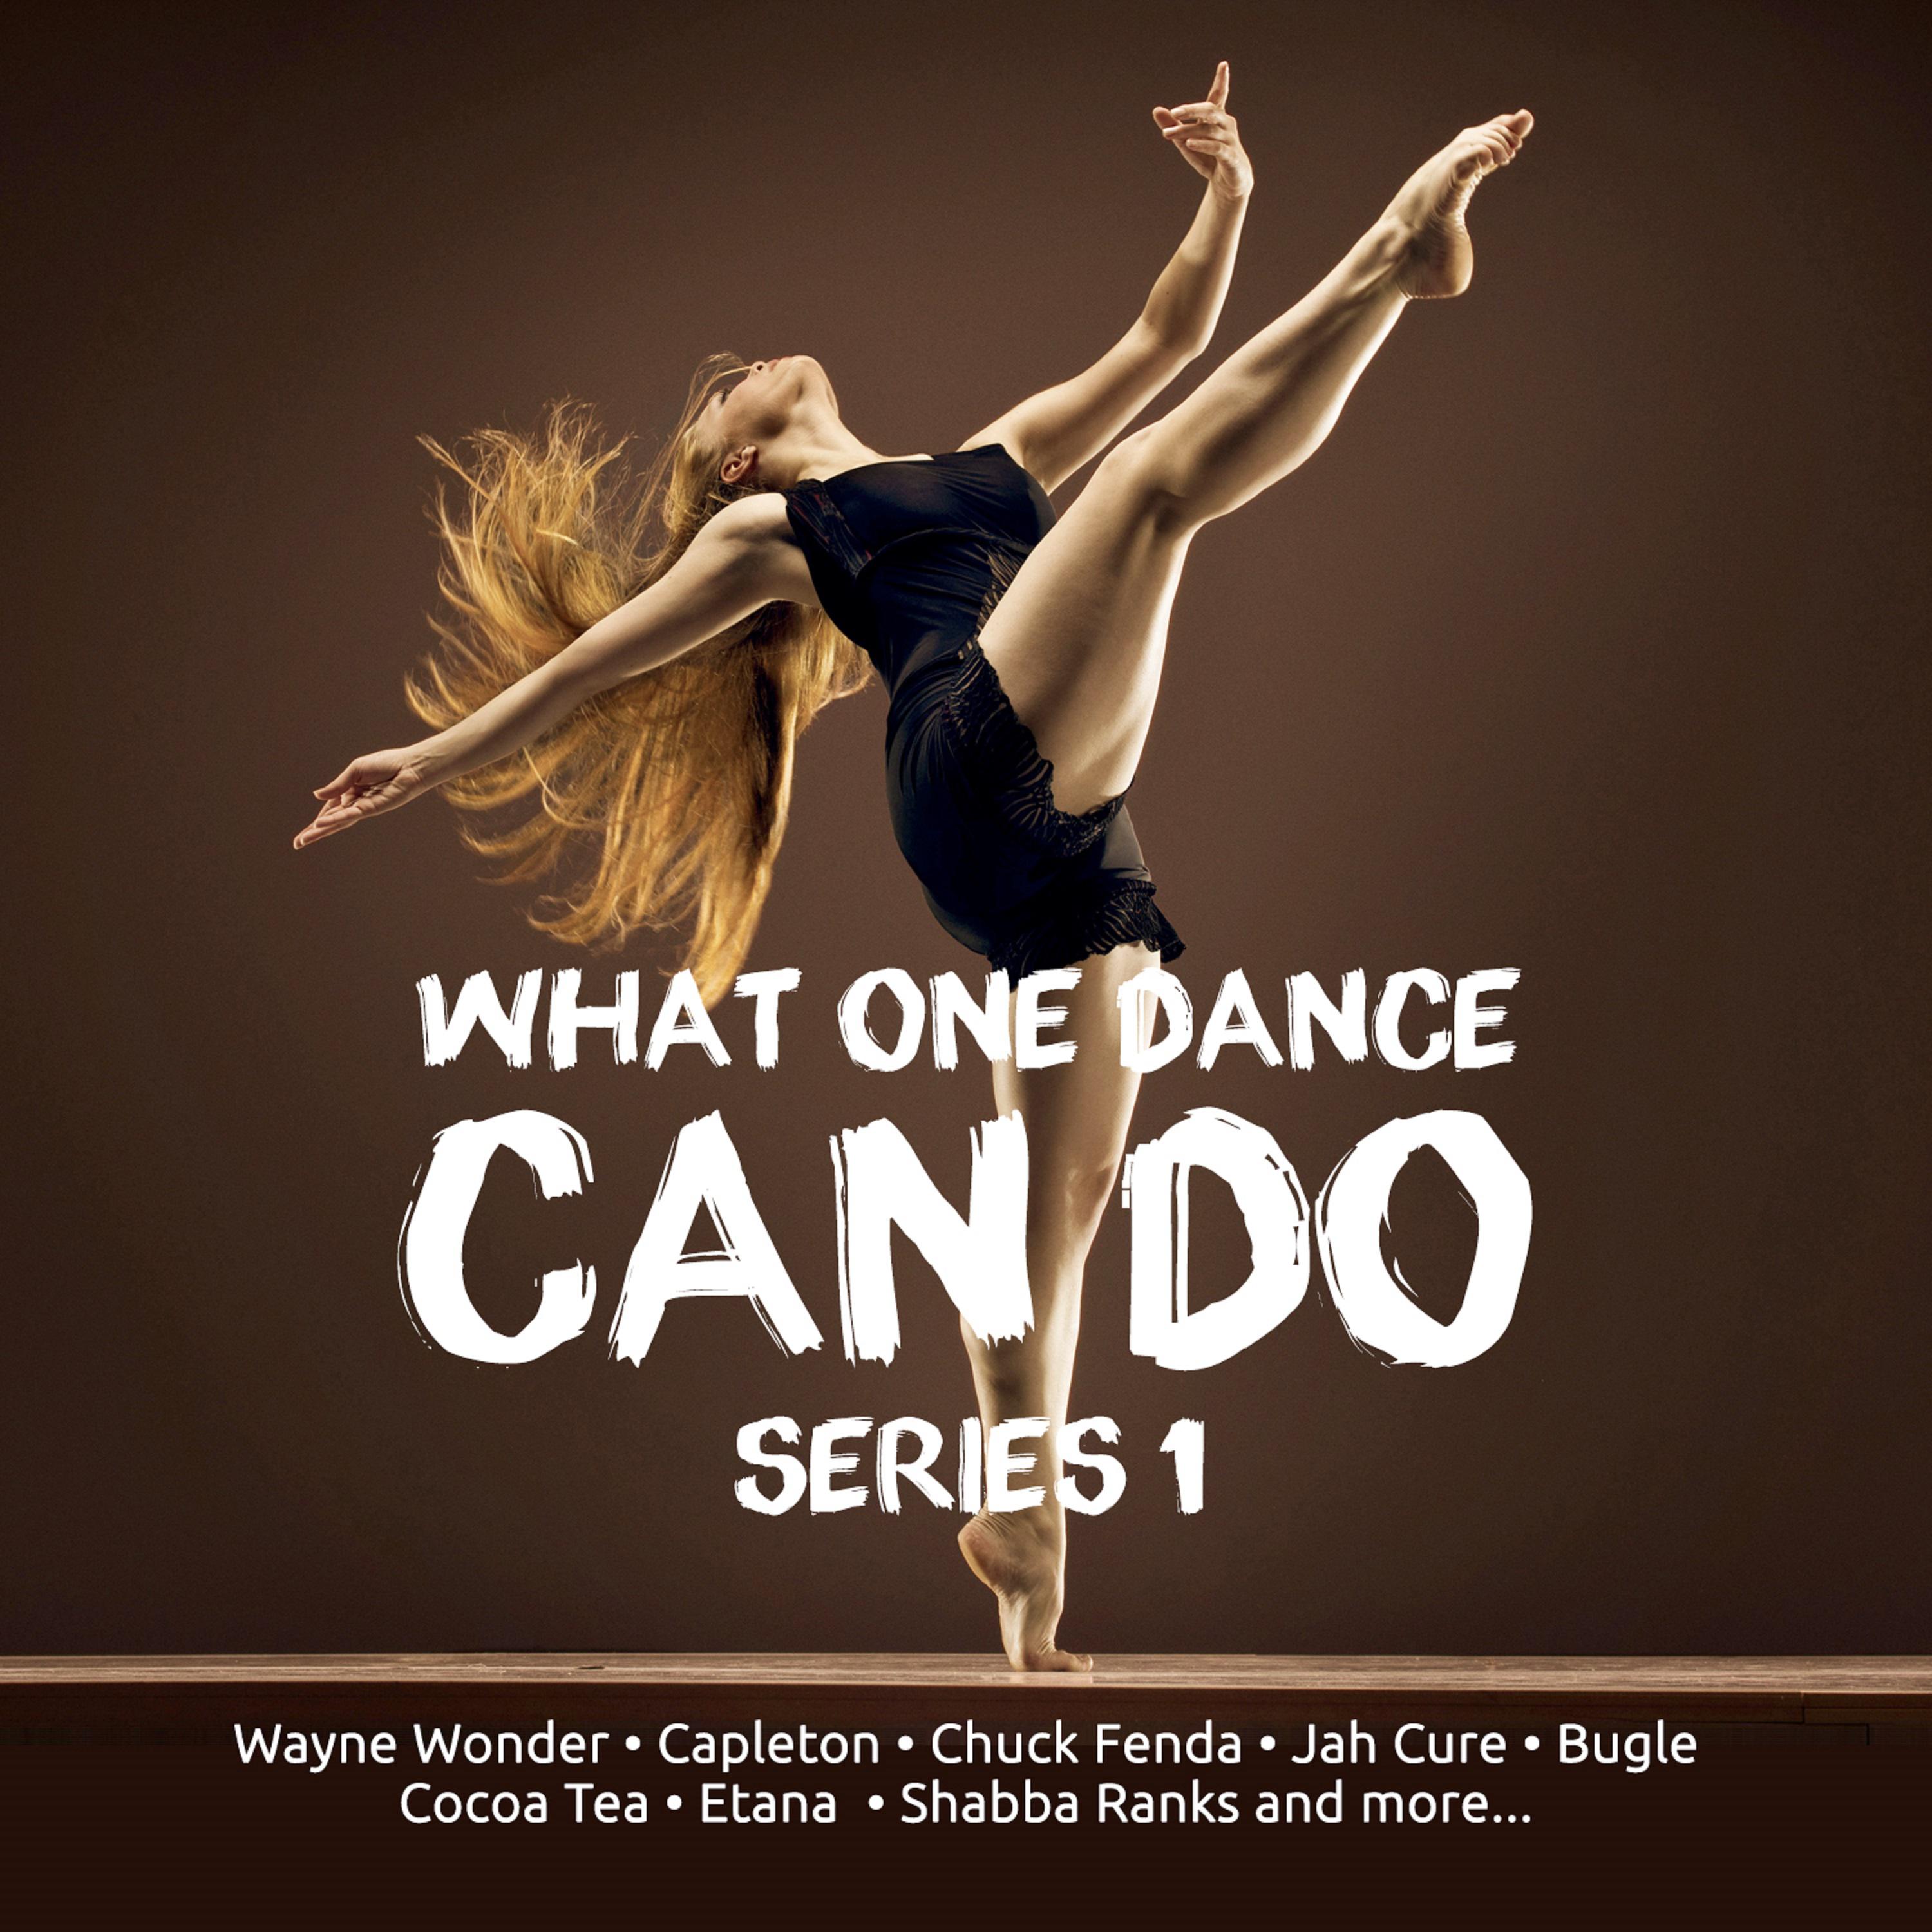 What One Dance Can Do Series 1